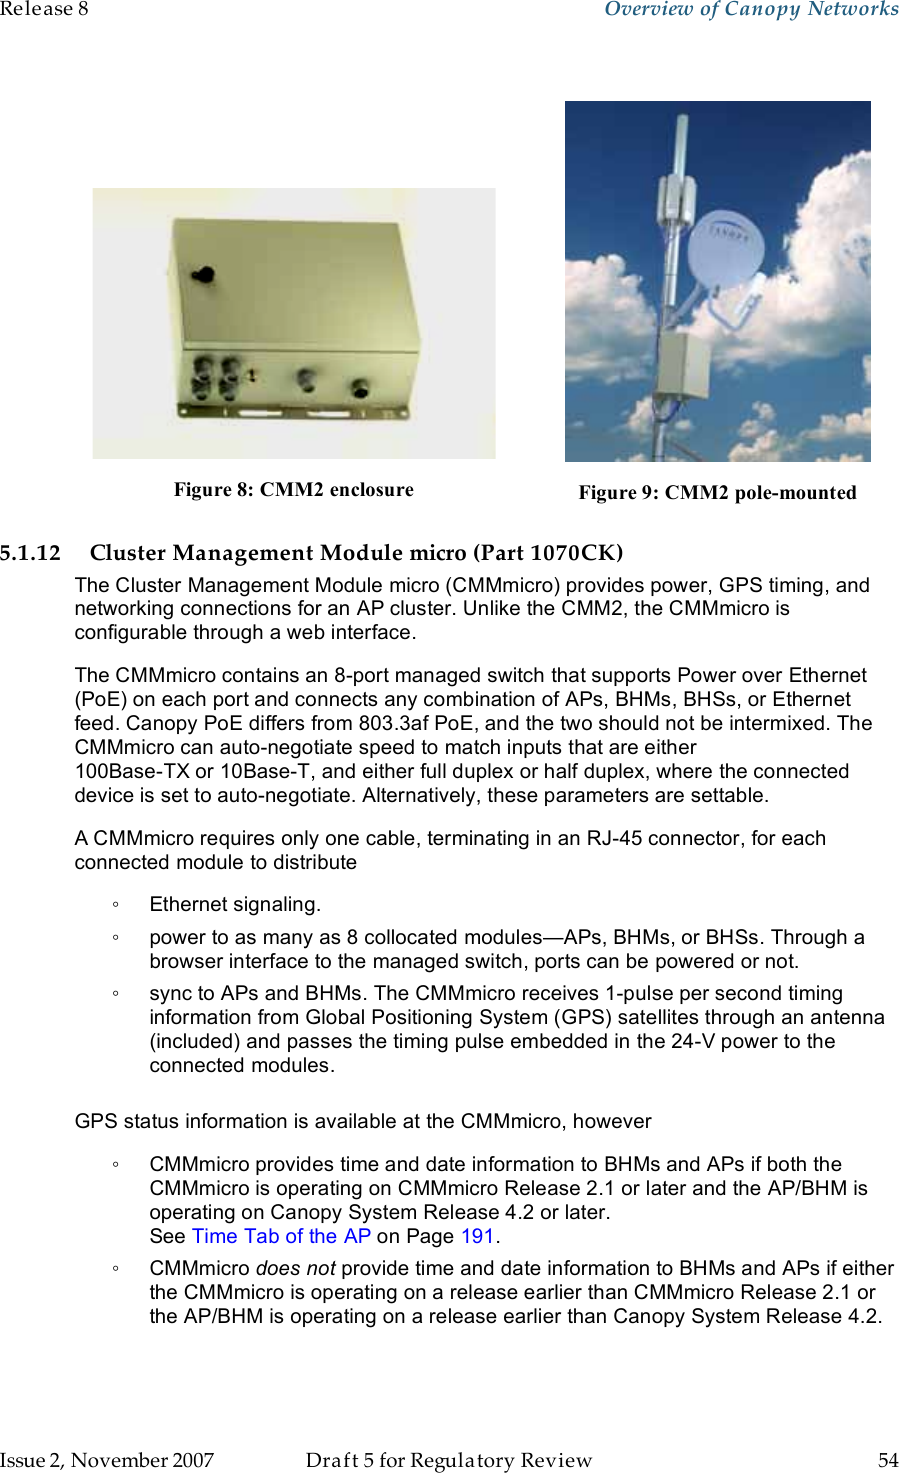 Release 8    Overview of Canopy Networks                  March 200                  Through Software Release 6.   Issue 2, November 2007  Draft 5 for Regulatory Review  54        Figure 8: CMM2 enclosure  Figure 9: CMM2 pole-mounted 5.1.12 Cluster Management Module micro (Part 1070CK) The Cluster Management Module micro (CMMmicro) provides power, GPS timing, and networking connections for an AP cluster. Unlike the CMM2, the CMMmicro is configurable through a web interface. The CMMmicro contains an 8-port managed switch that supports Power over Ethernet (PoE) on each port and connects any combination of APs, BHMs, BHSs, or Ethernet feed. Canopy PoE differs from 803.3af PoE, and the two should not be intermixed. The CMMmicro can auto-negotiate speed to match inputs that are either  100Base-TX or 10Base-T, and either full duplex or half duplex, where the connected device is set to auto-negotiate. Alternatively, these parameters are settable. A CMMmicro requires only one cable, terminating in an RJ-45 connector, for each connected module to distribute ◦  Ethernet signaling. ◦  power to as many as 8 collocated modules—APs, BHMs, or BHSs. Through a browser interface to the managed switch, ports can be powered or not. ◦  sync to APs and BHMs. The CMMmicro receives 1-pulse per second timing information from Global Positioning System (GPS) satellites through an antenna (included) and passes the timing pulse embedded in the 24-V power to the connected modules.  GPS status information is available at the CMMmicro, however ◦  CMMmicro provides time and date information to BHMs and APs if both the CMMmicro is operating on CMMmicro Release 2.1 or later and the AP/BHM is operating on Canopy System Release 4.2 or later.  See Time Tab of the AP on Page 191. ◦  CMMmicro does not provide time and date information to BHMs and APs if either the CMMmicro is operating on a release earlier than CMMmicro Release 2.1 or the AP/BHM is operating on a release earlier than Canopy System Release 4.2. 